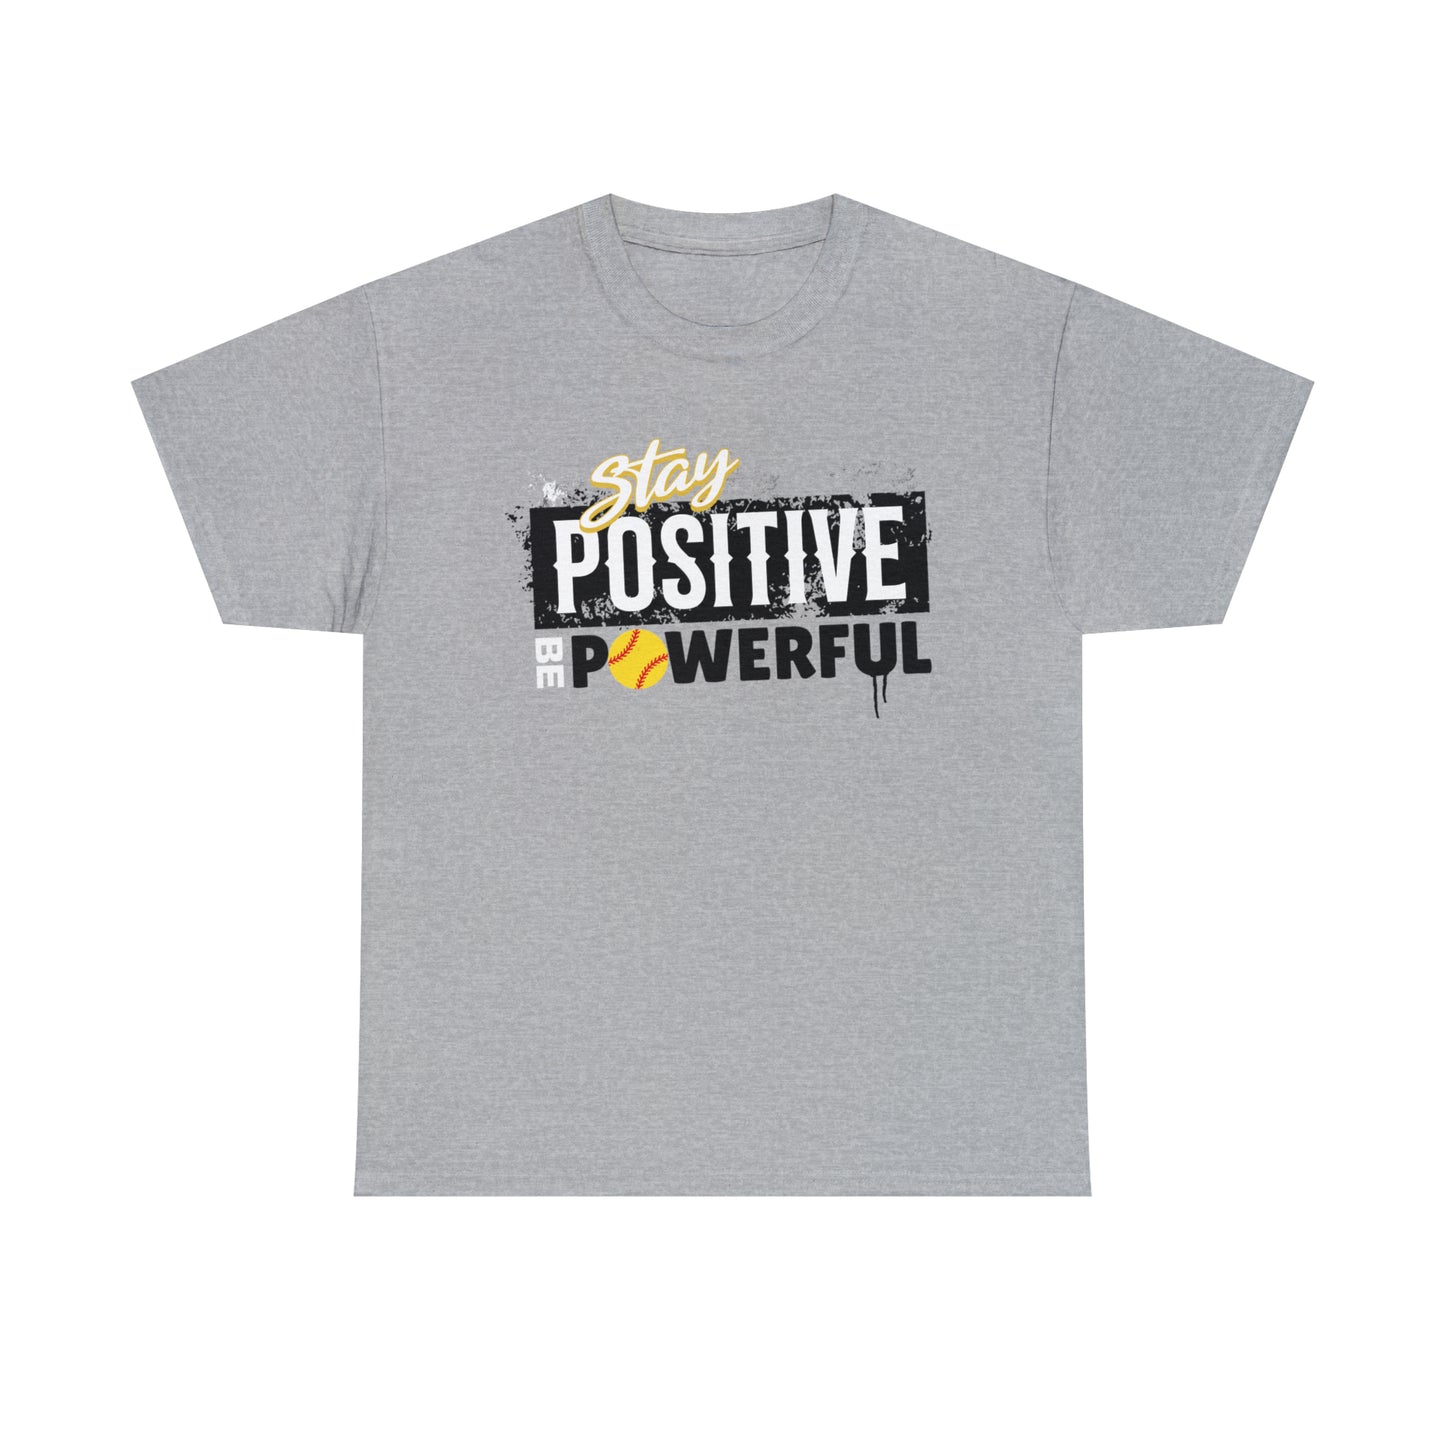 Stay Positive Be Powerful Shirt